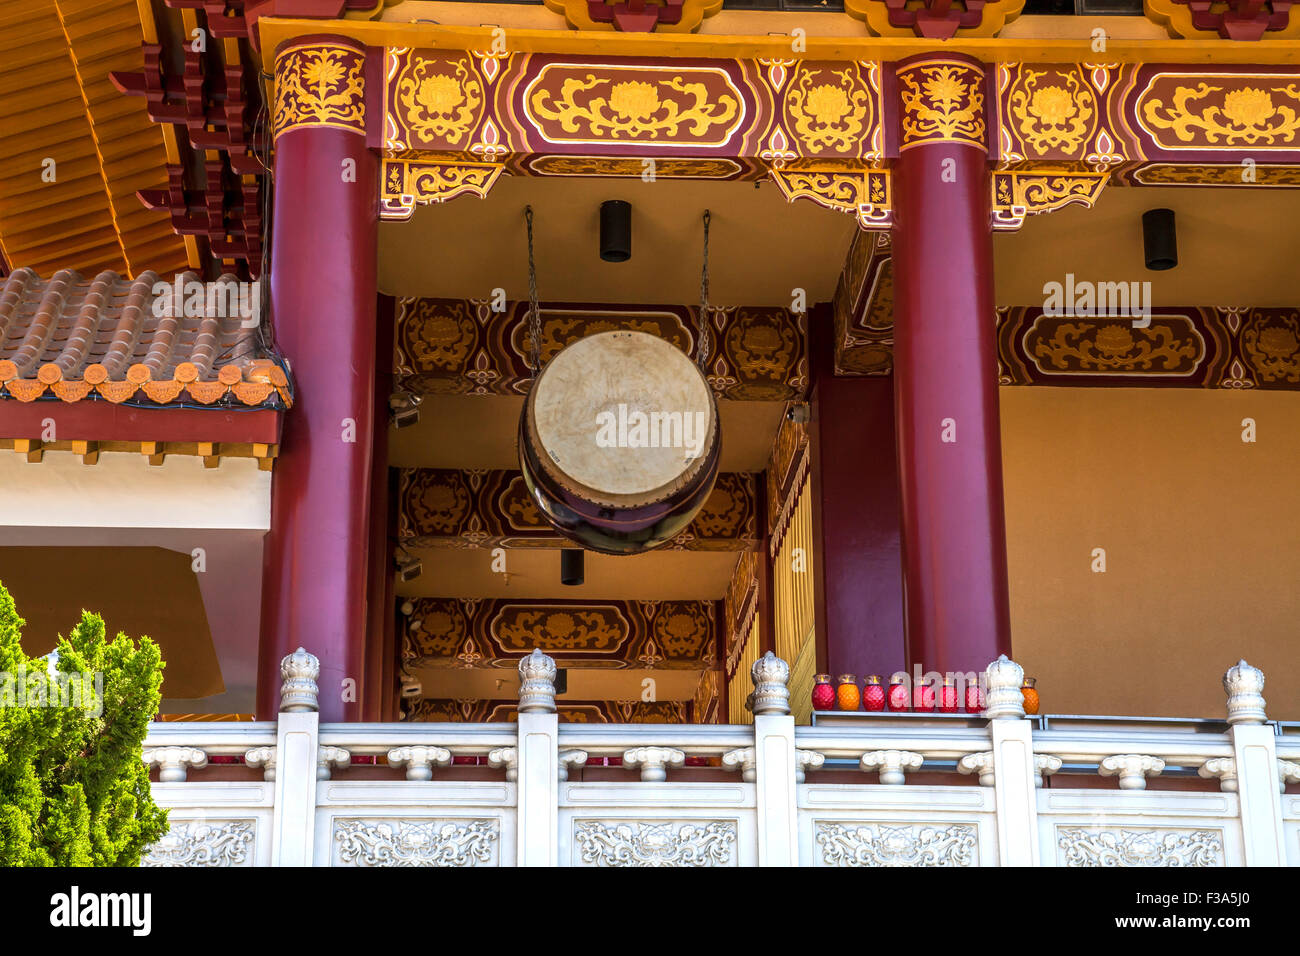 Drum in the ceiling of Hsi Lai Temple, Hacienda Heights, Los Angeles County, California, USA Stock Photo